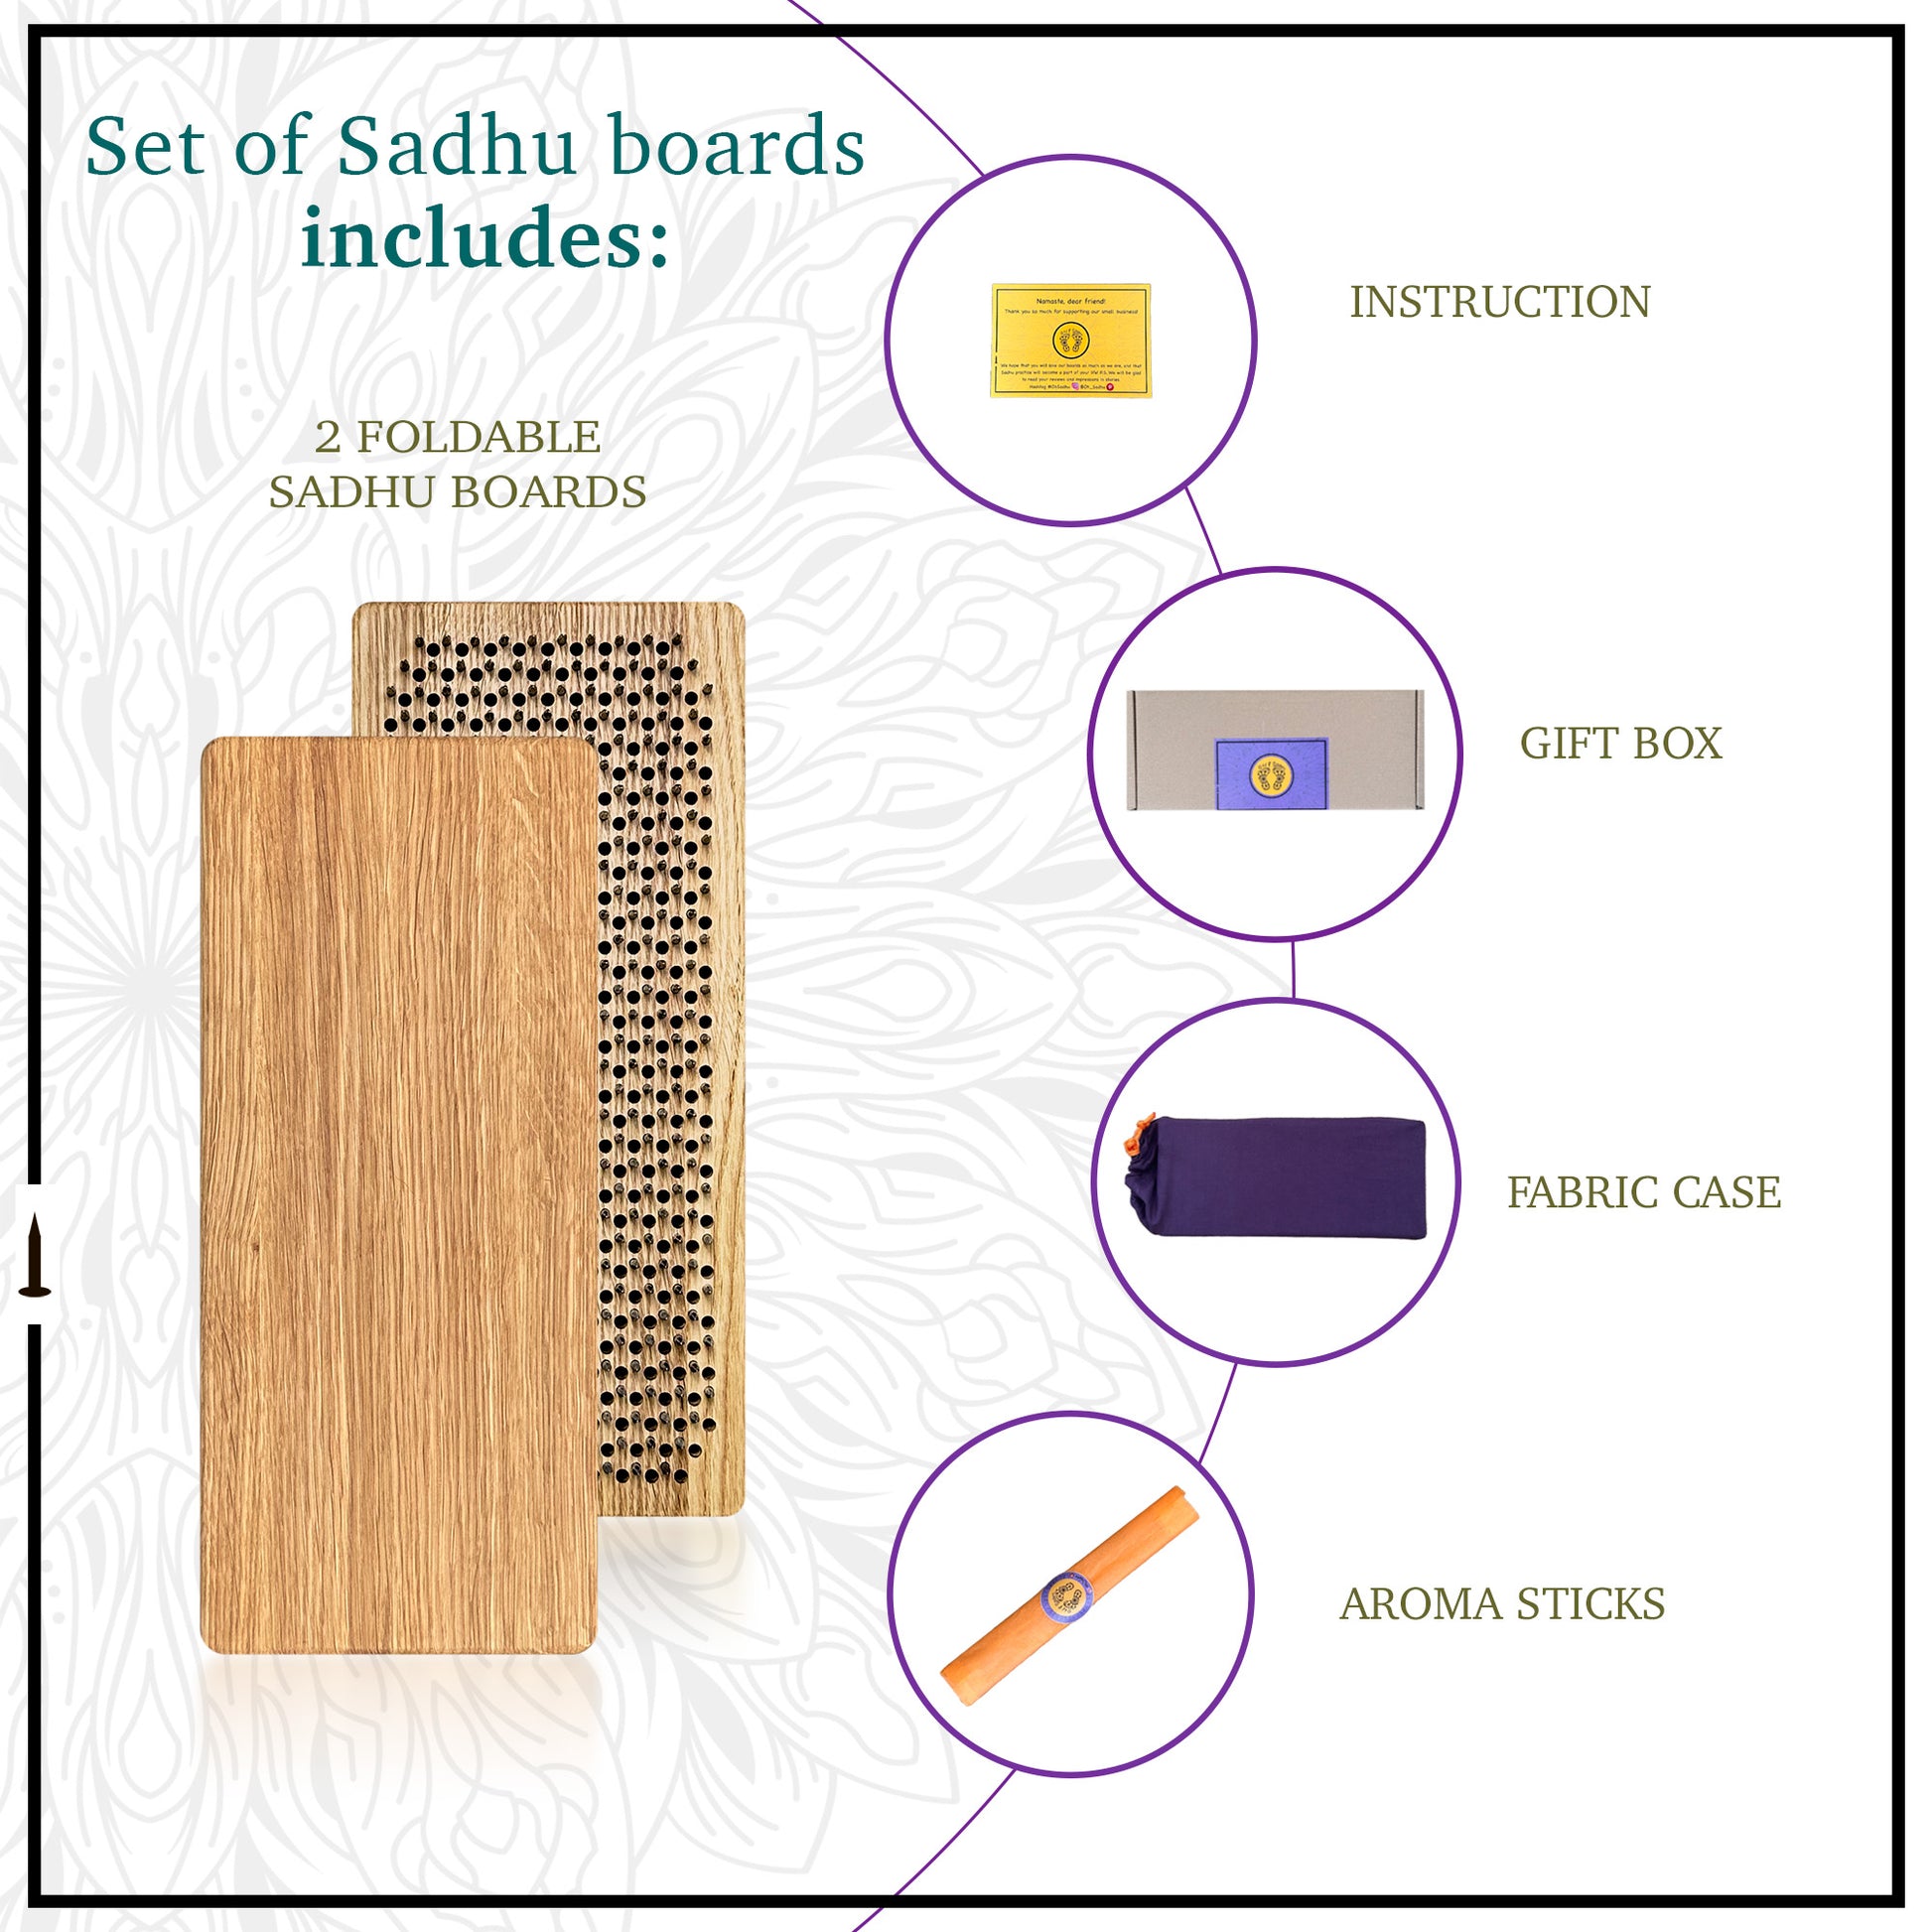 What is included in set of sadhu board oh! sadhu